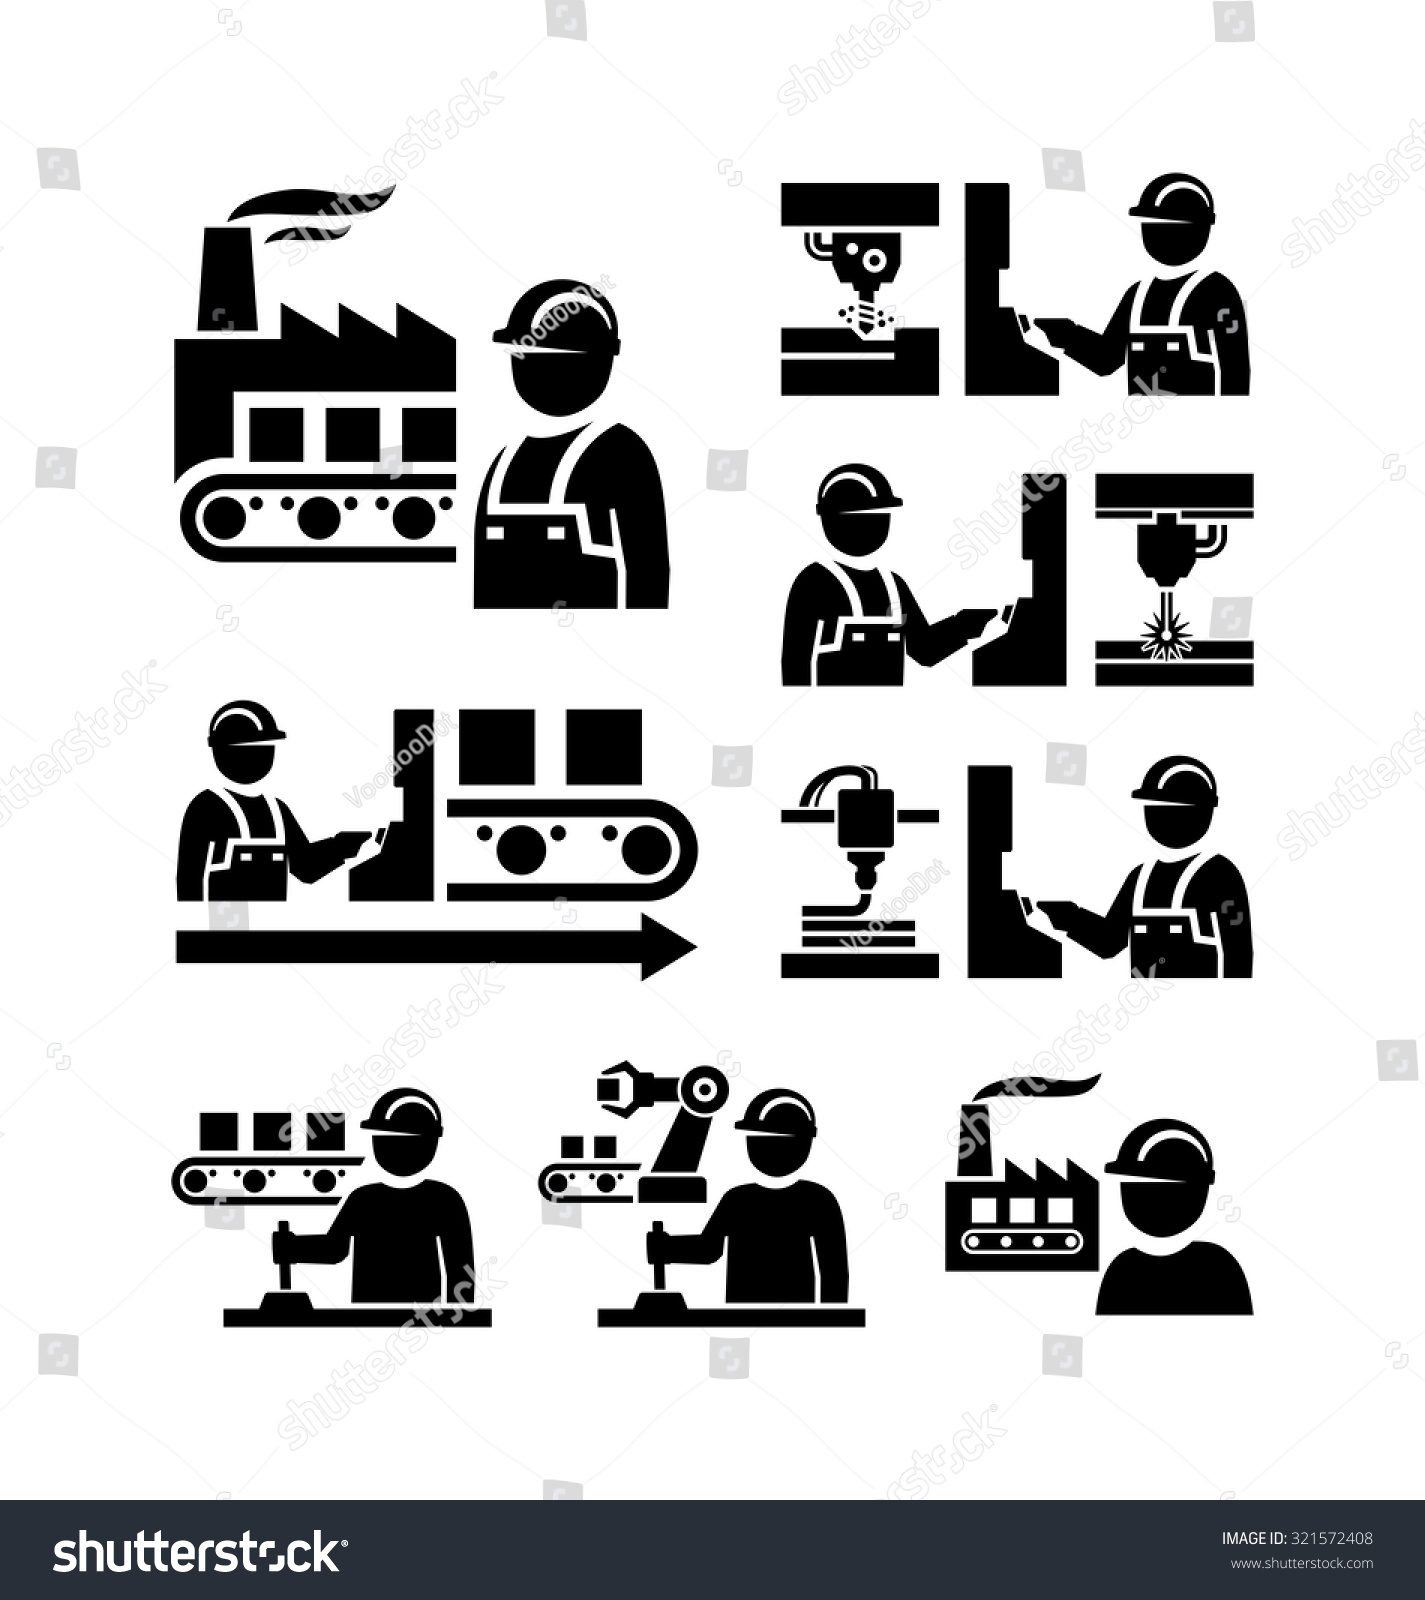 clip art of assembly line worker - photo #10